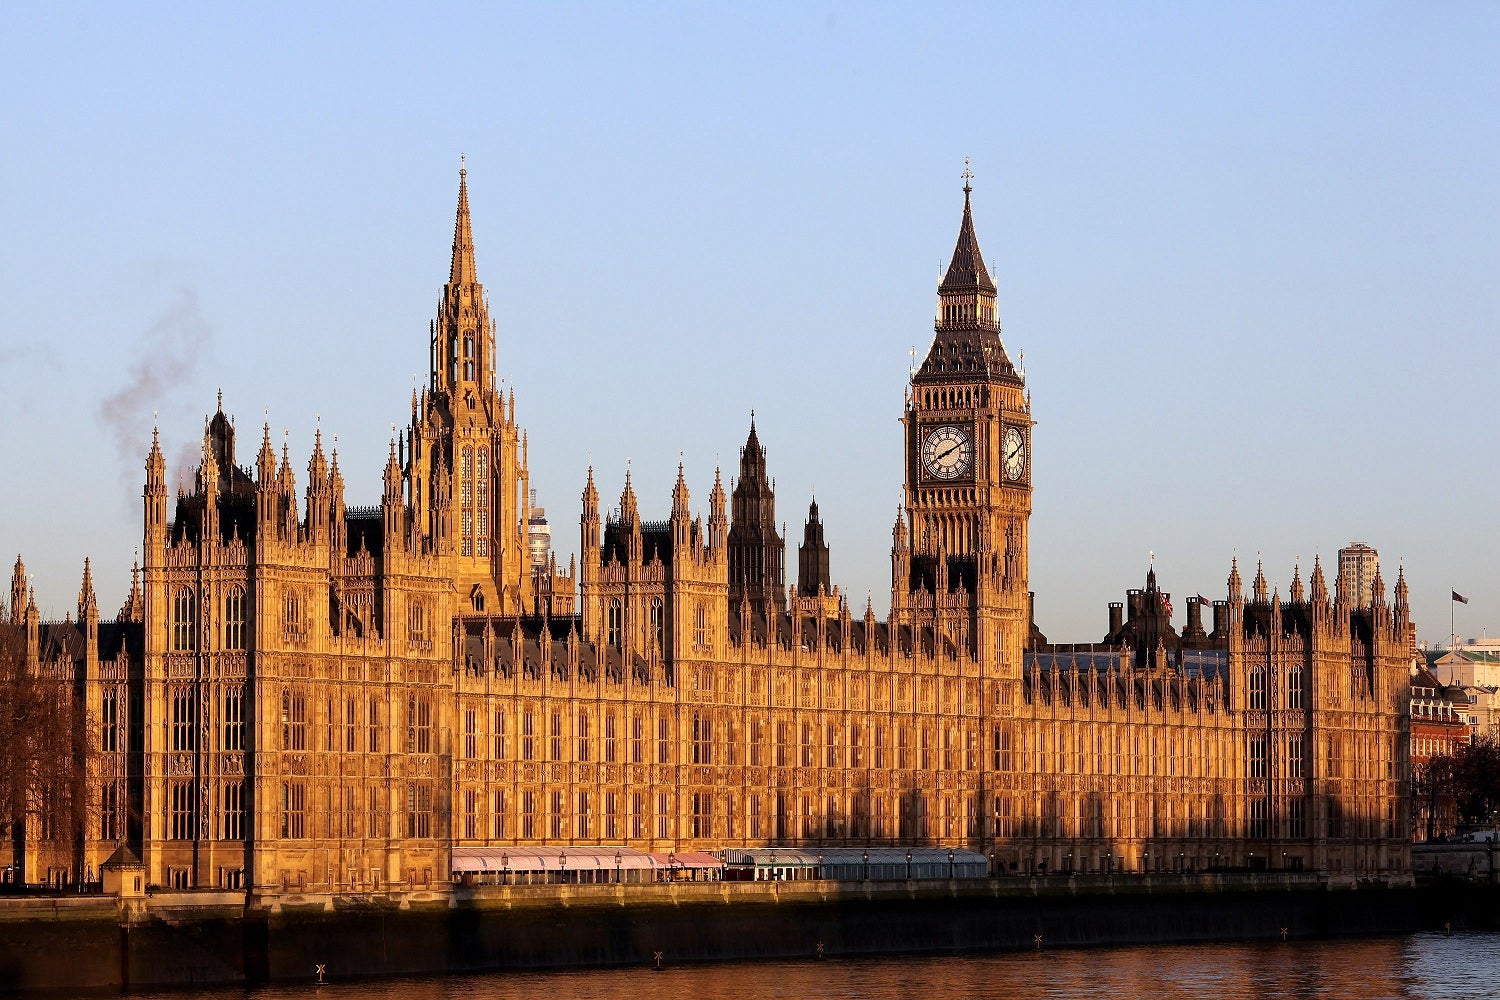 The protest will take place in Old Palace Yard near the Houses of Parliament